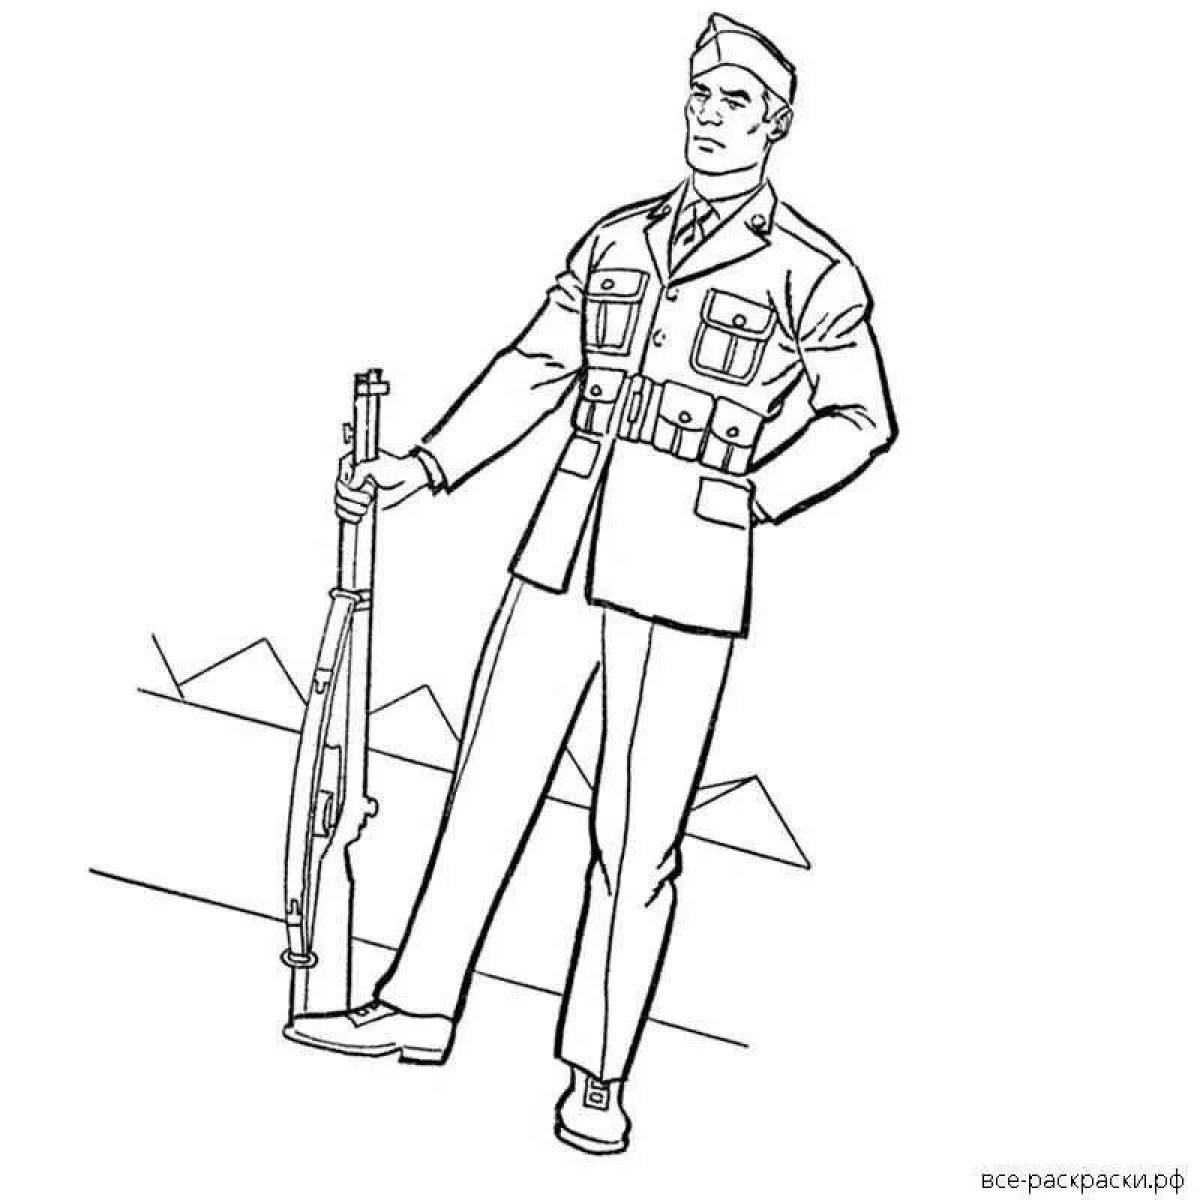 Soviet soldier bright coloring page